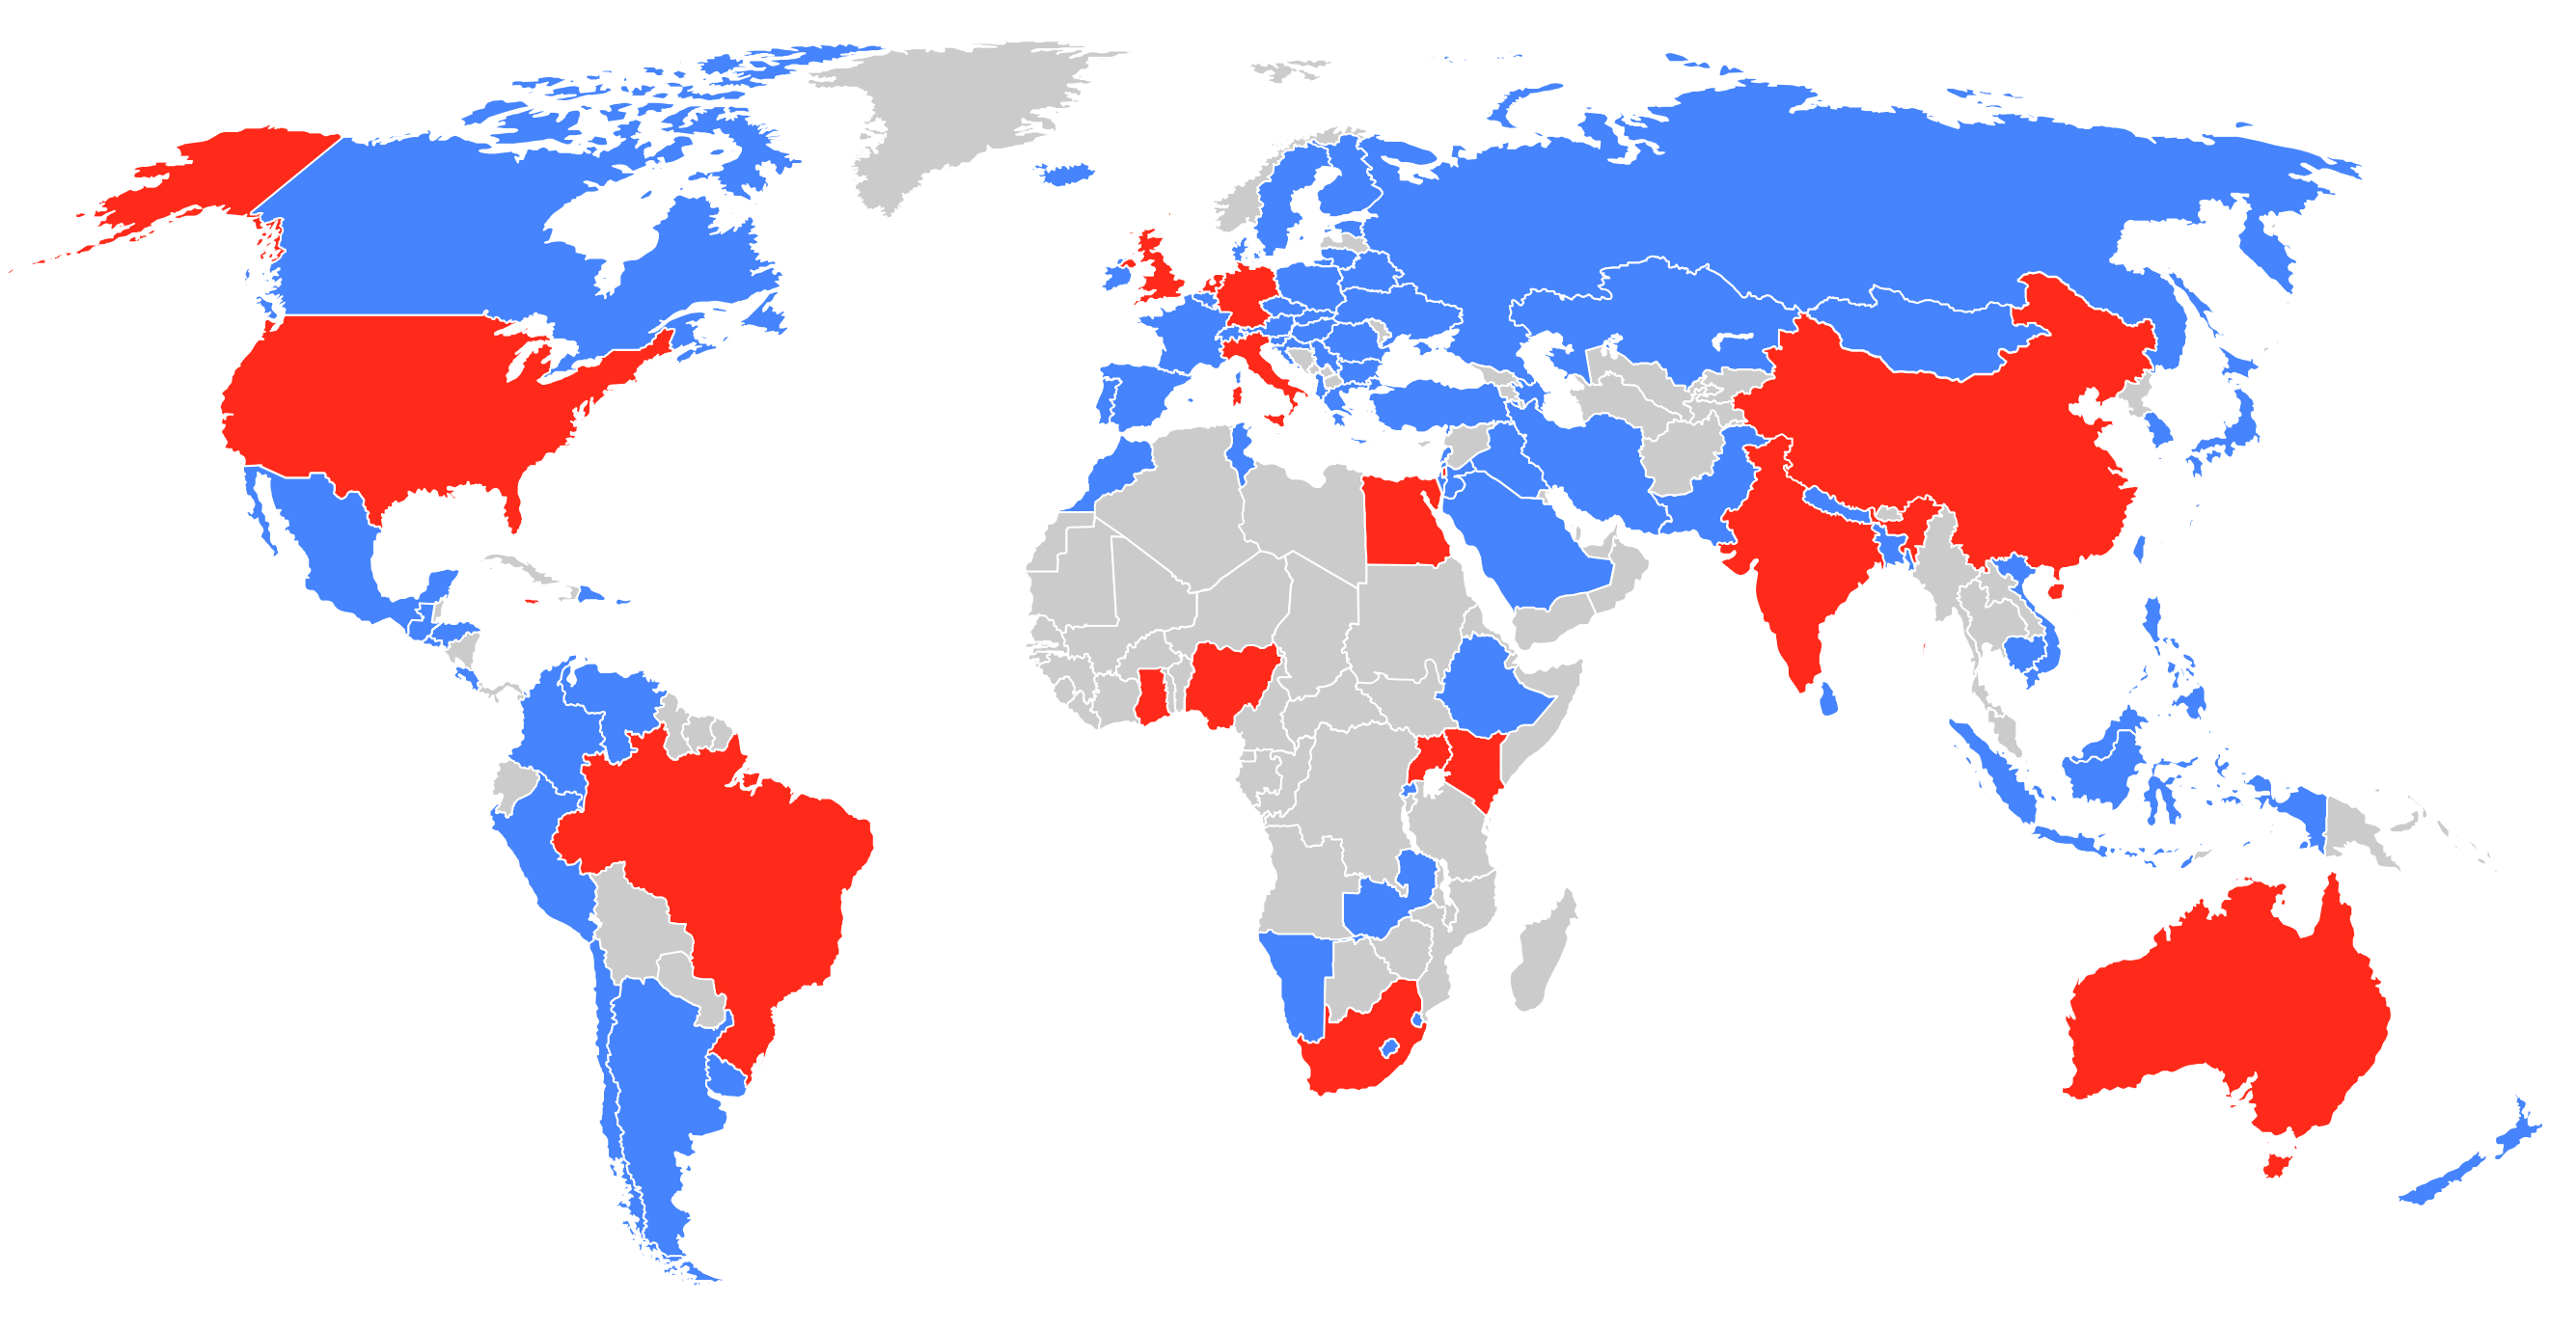 World map highlighting the countries of residence of CopyrightX participants